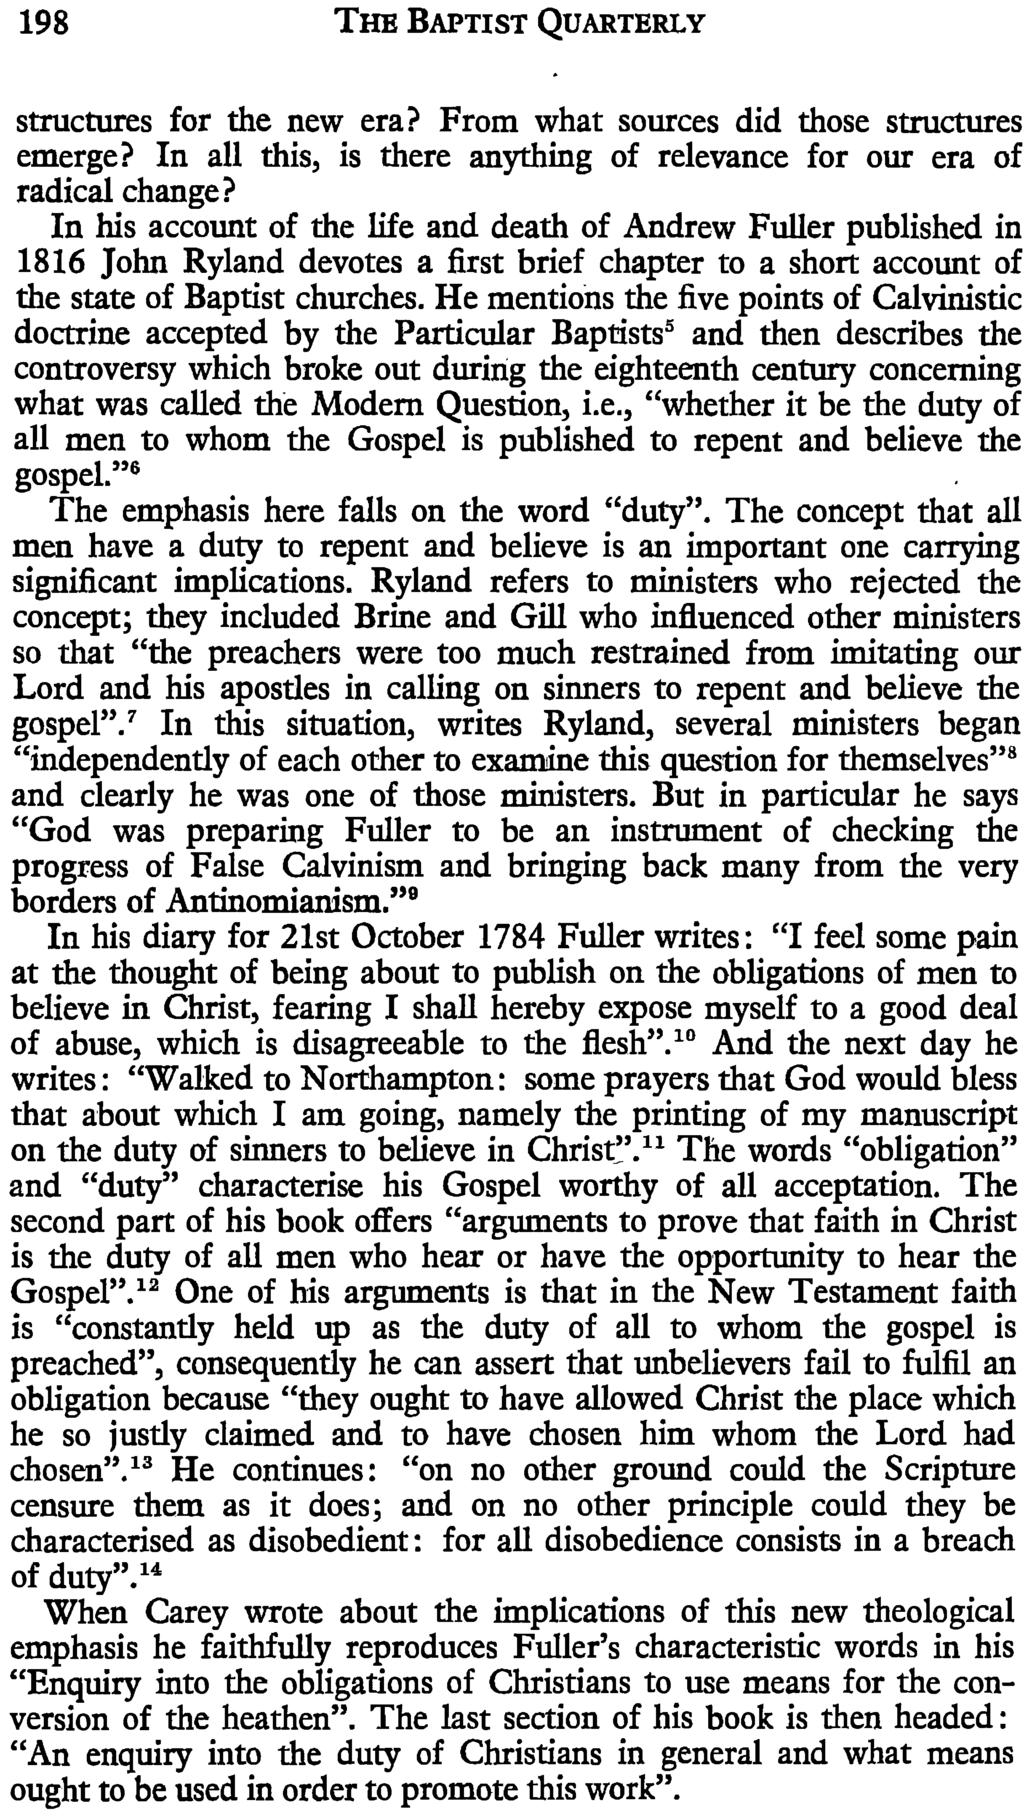 198 THE BAPTIST QUARTERLY structures for the new era? From what sources did those structures emerge? In all this, is there anything of relevance for our era of radical change?